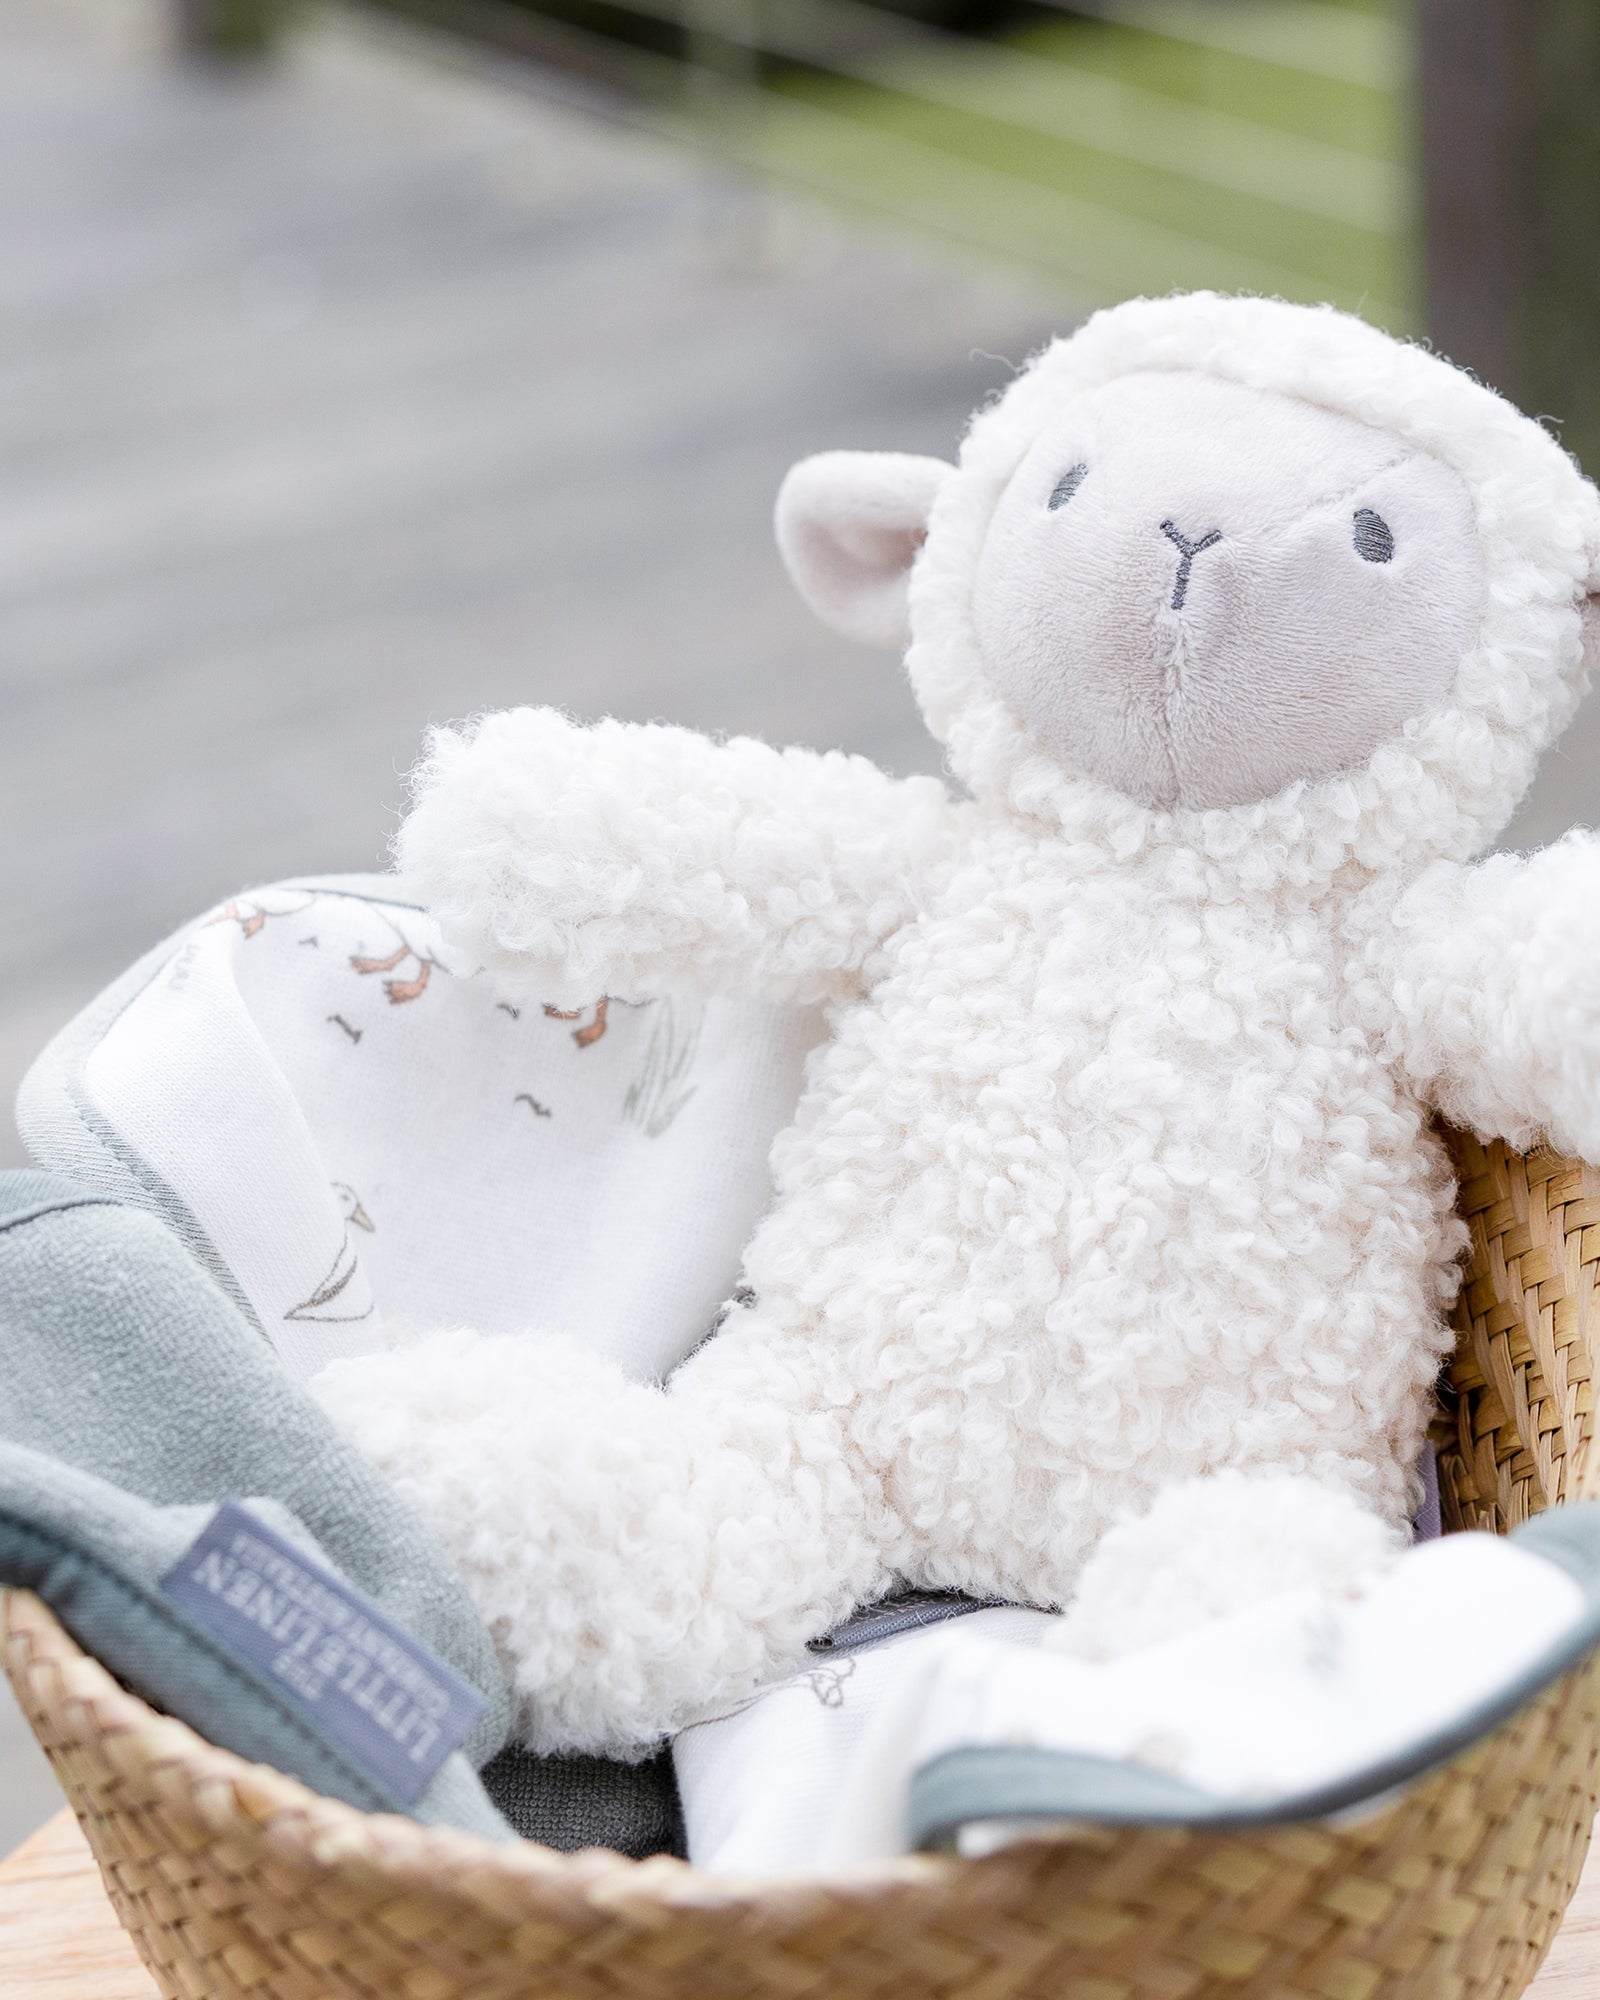 The Little Linen Company Soft Plush Baby Toy & Face Washers - Farmyard Lamb